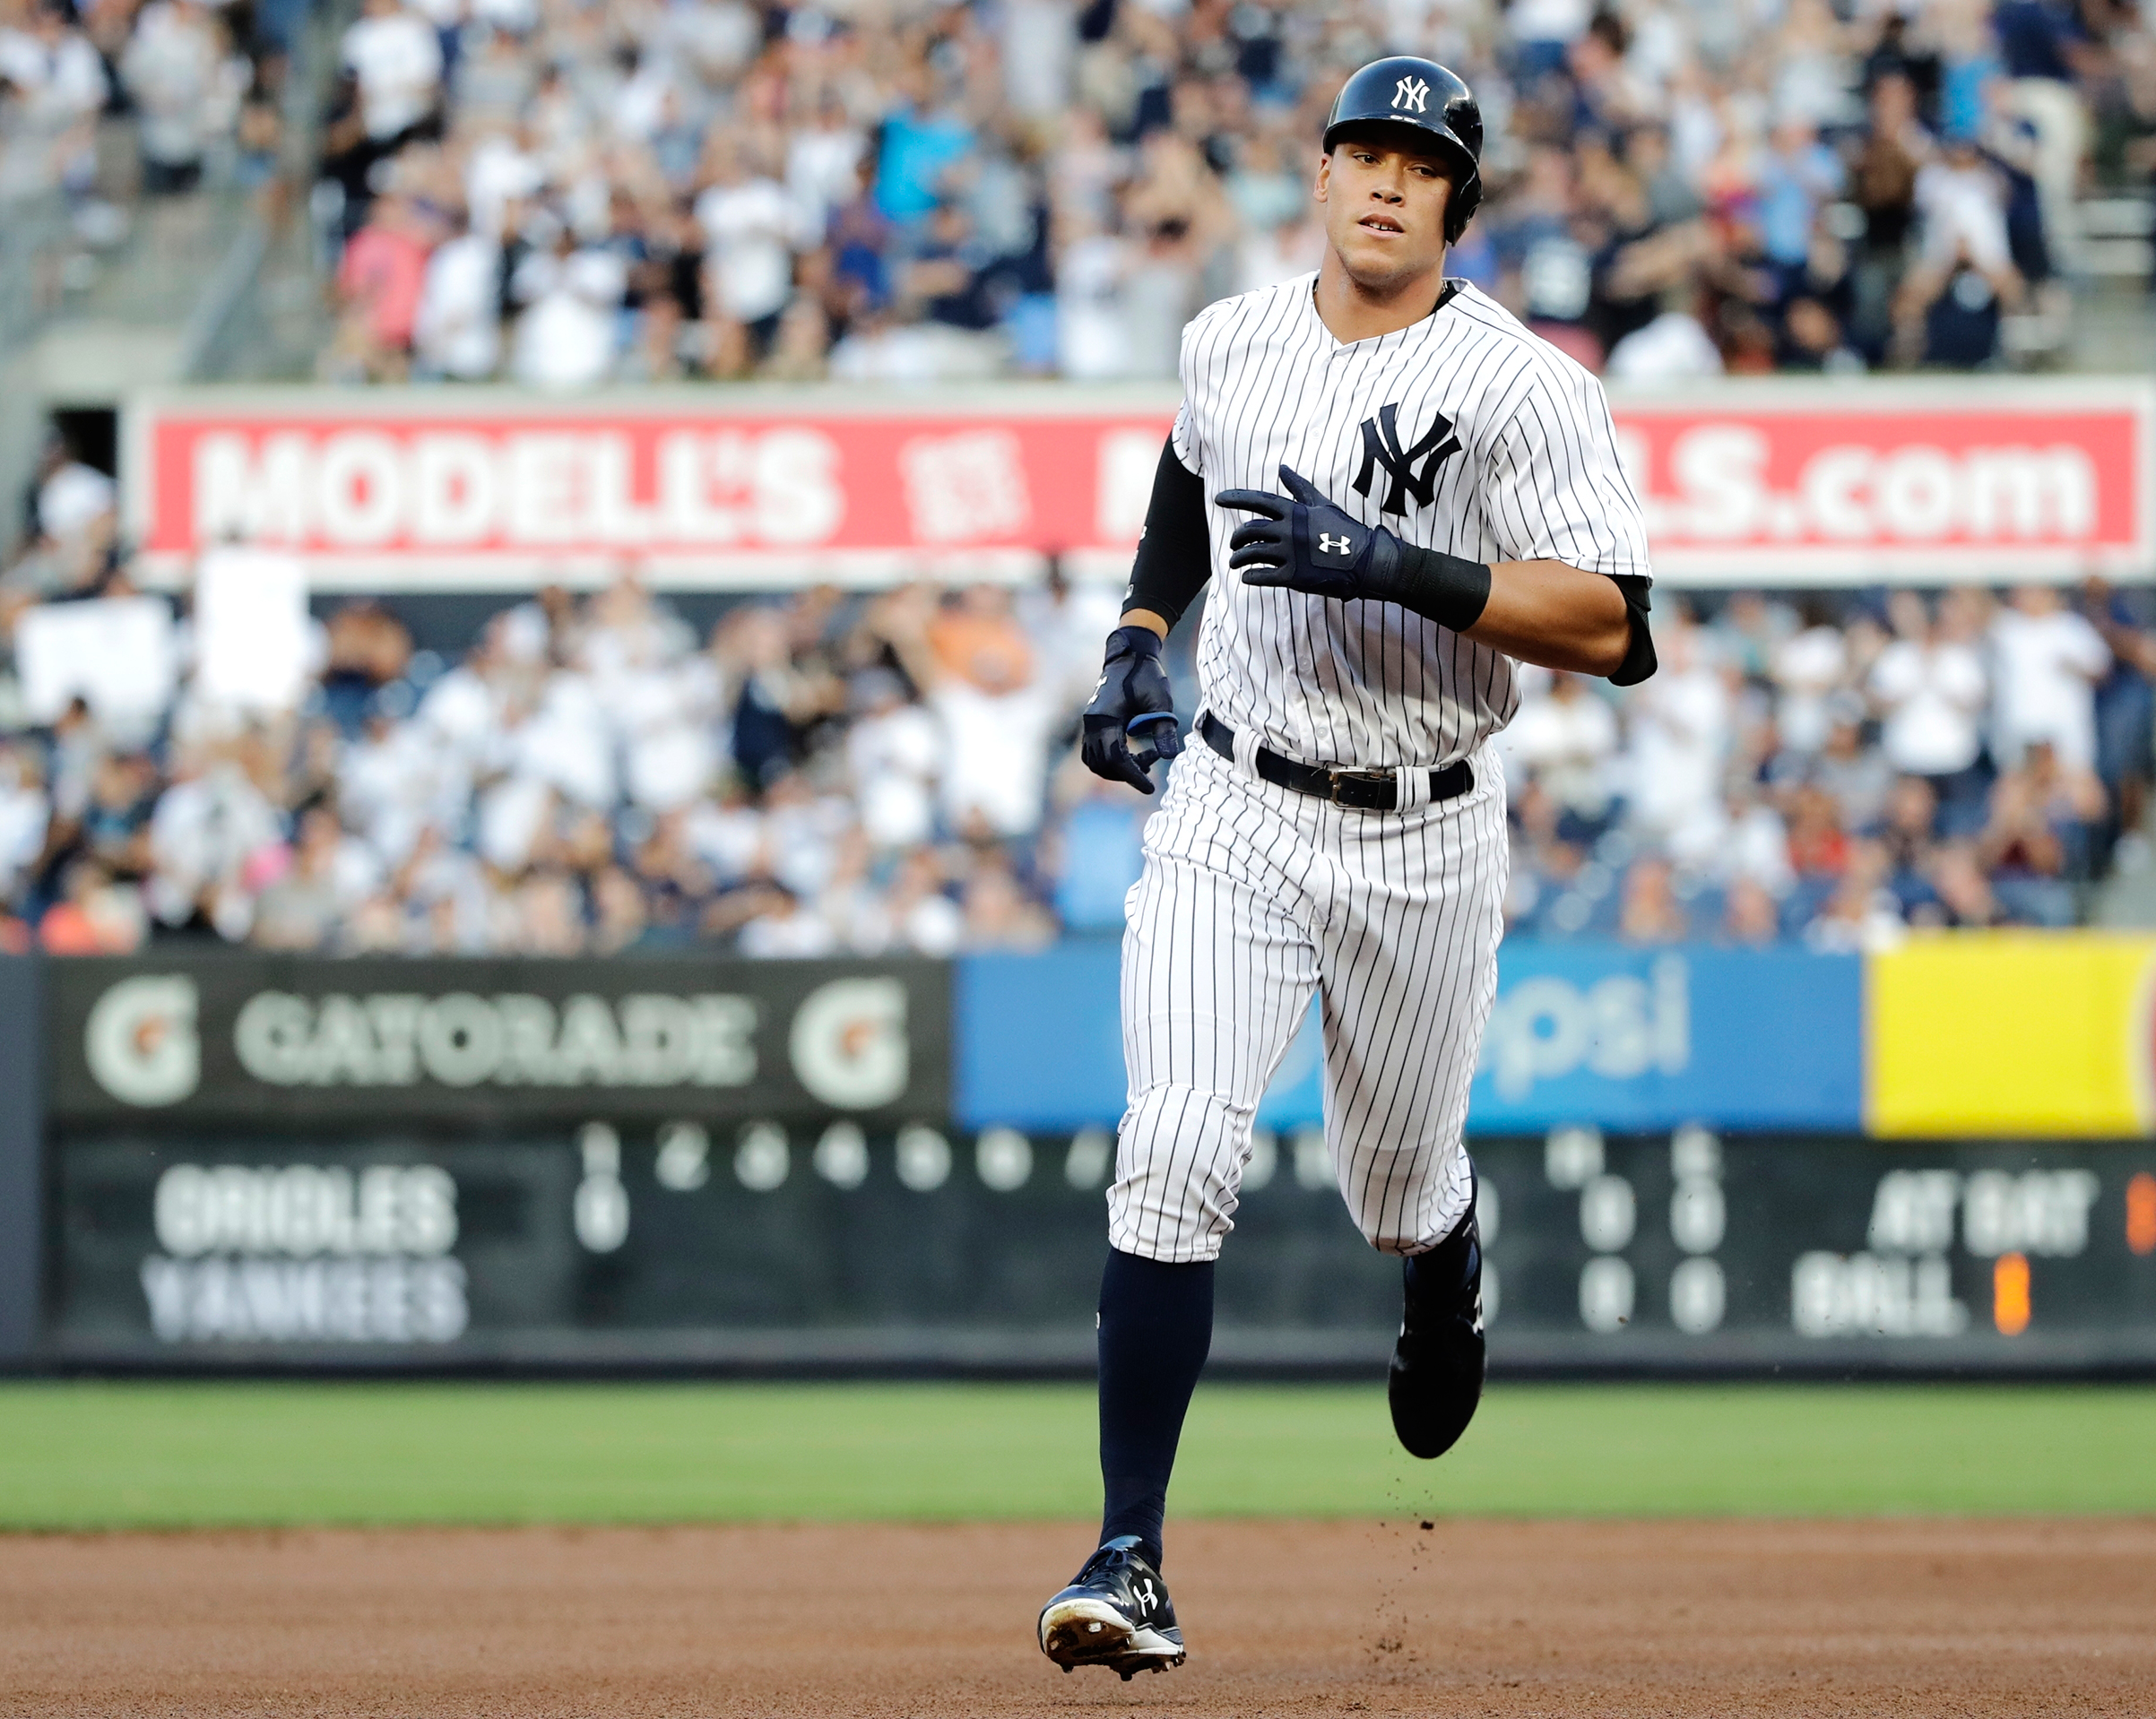 New York Yankees' Aaron Judge runs the bases after hitting a home run during the first inning of a baseball game against the Baltimore Orioles, Saturday, June 10, 2017, in New York. (Frank Franklin II—AP)